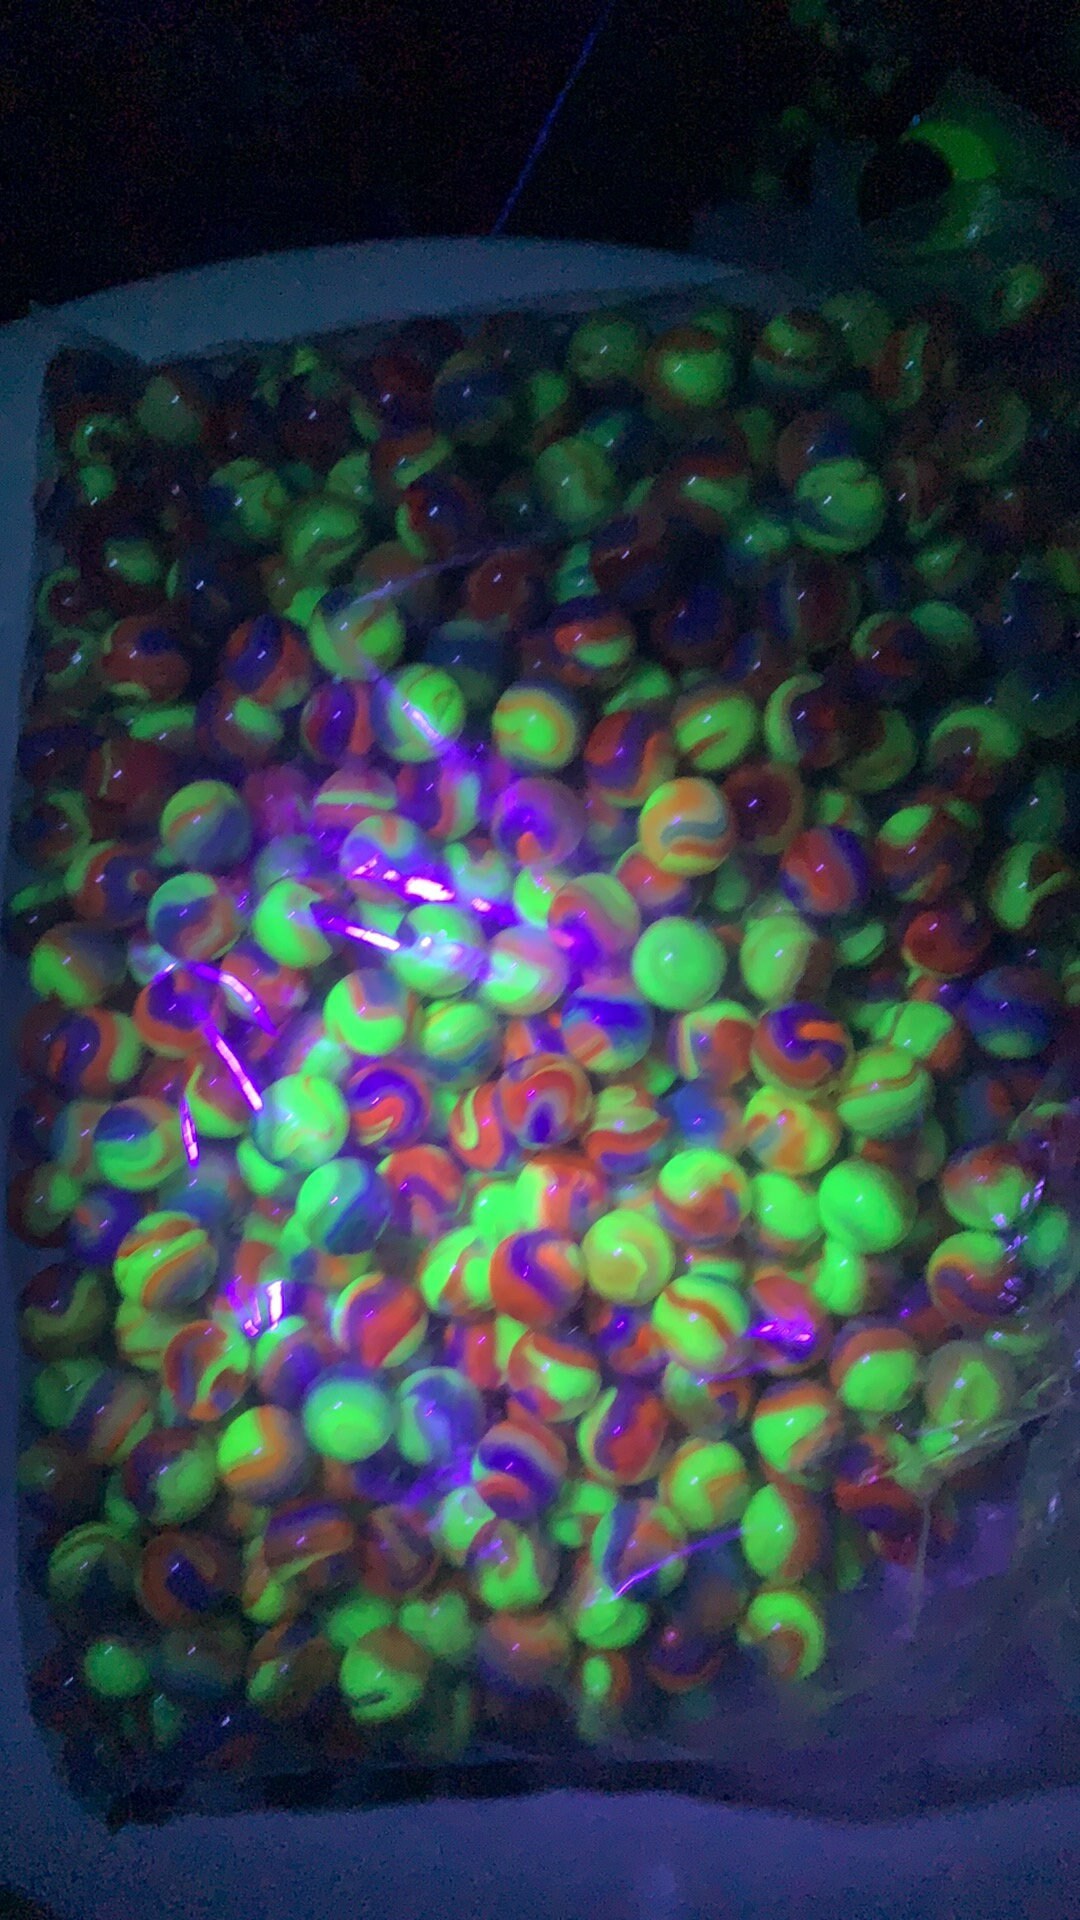 Received some marbles as a gift. They seem a little darker than normal  uranium glass but still fluoresce. The larger darker red marbles fluoresce  too although it's hard to see in the